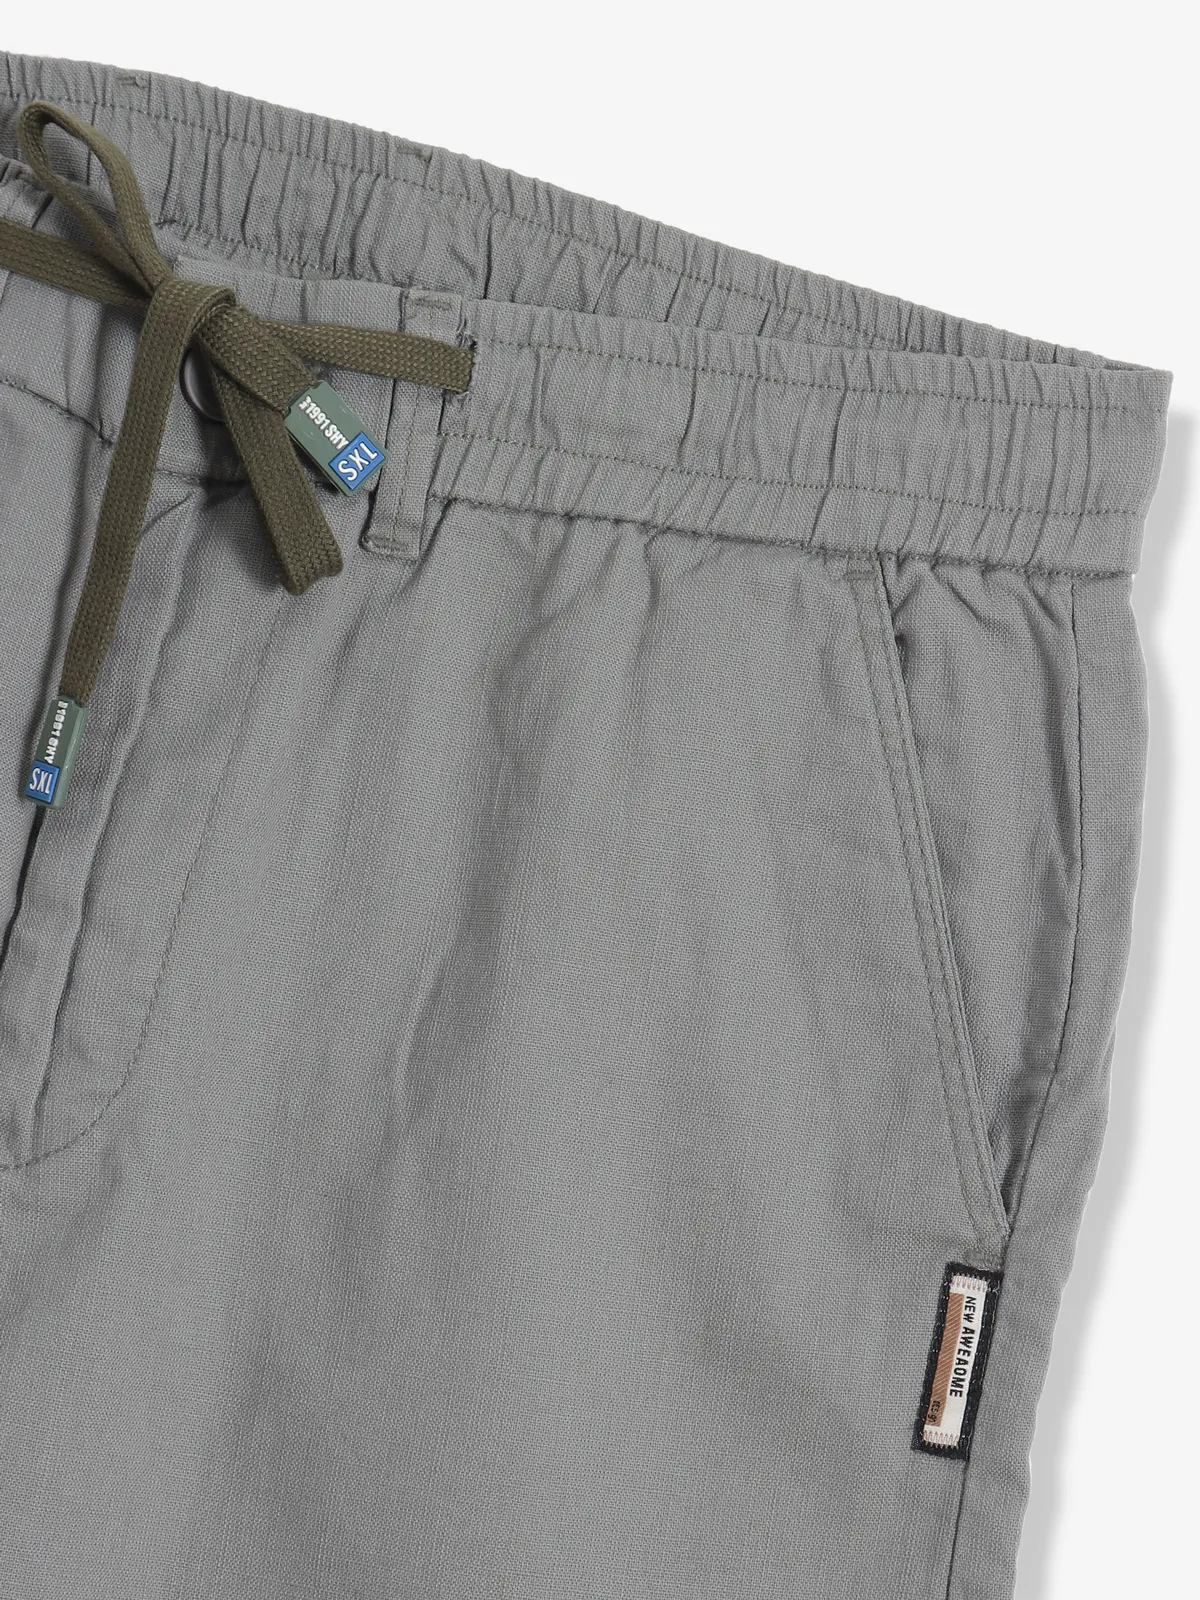 GS78 cotton shorts in solid grey